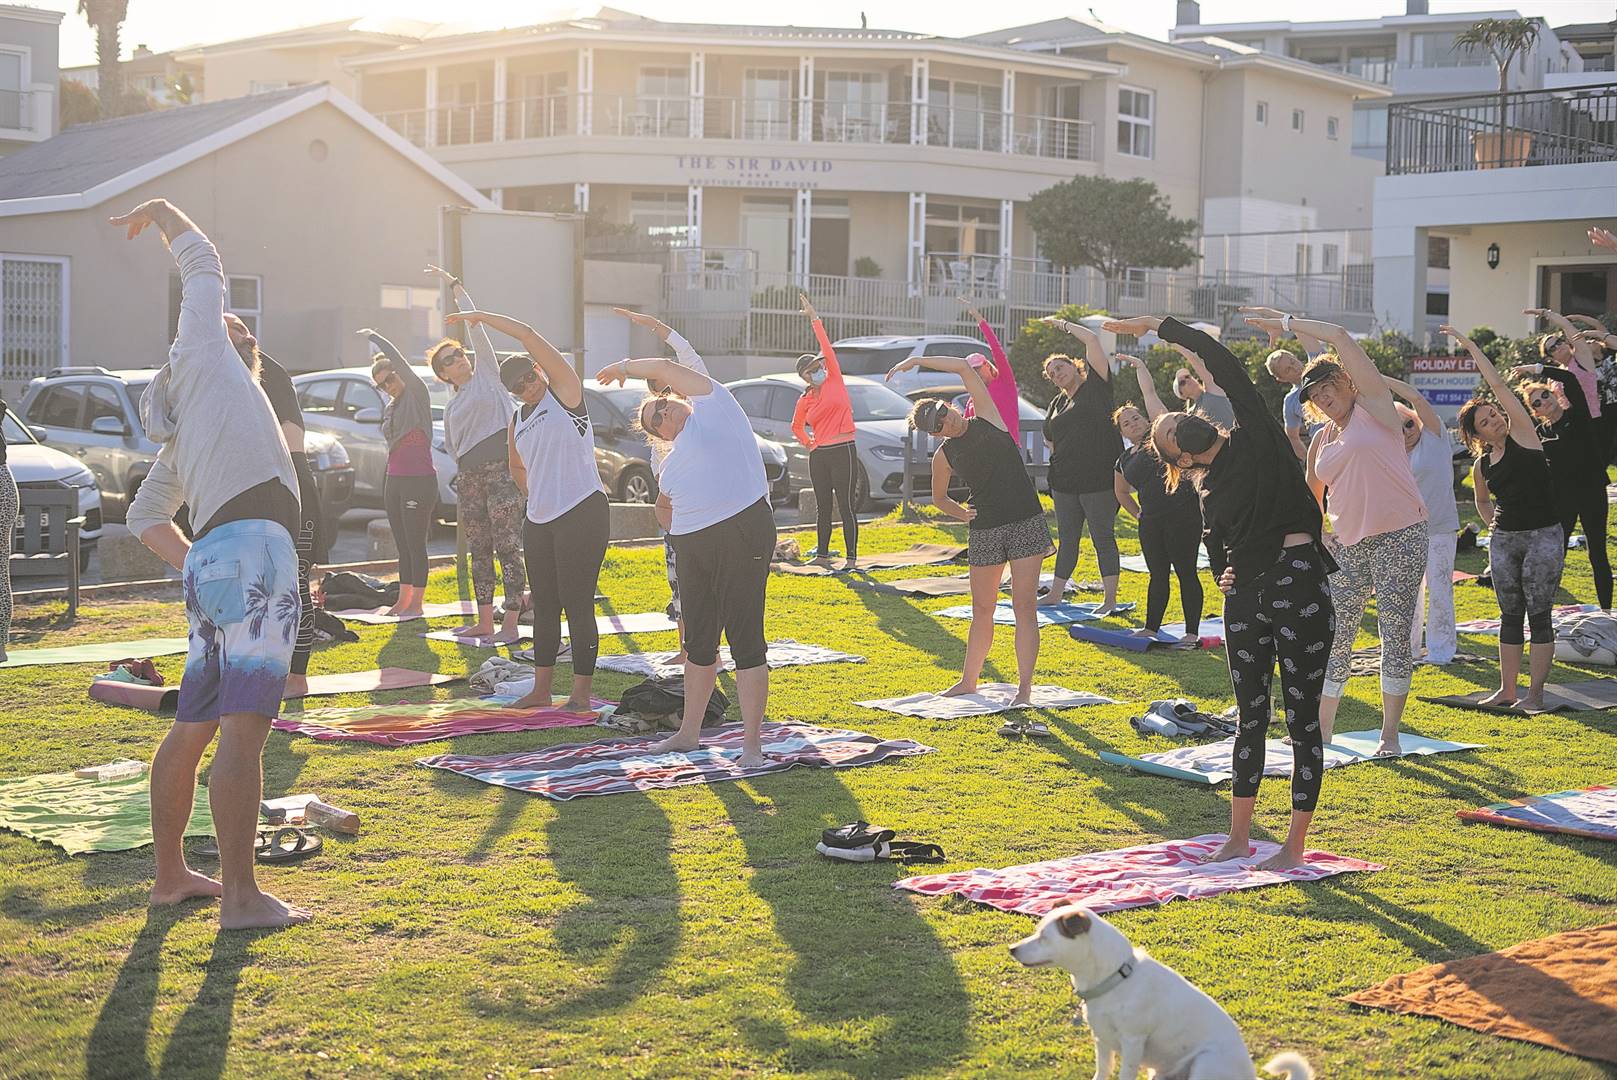 Join the free yoga classes offered in Bloubergstrand with Michael O’Rourke as coach. The classes take place once a week (on Tuesdays) with a dip in the ocean afterwards.